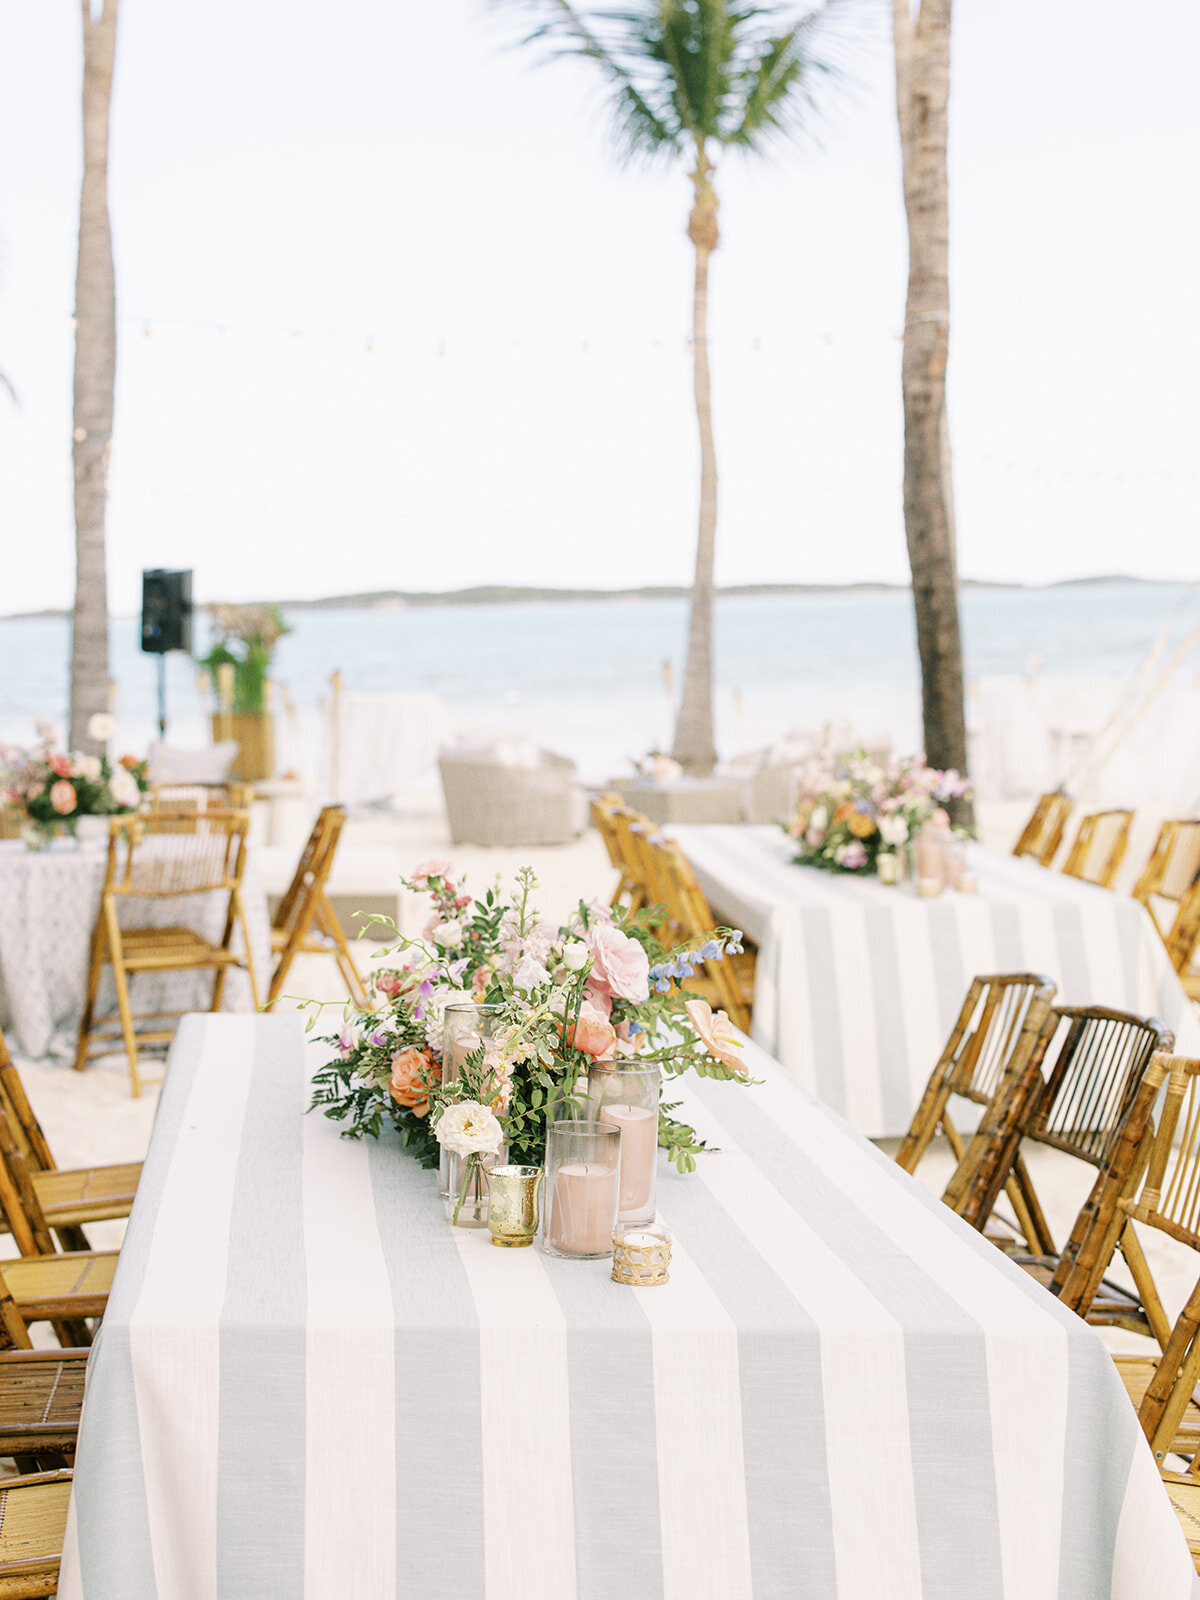 Tropical table floral meadows consisting of orchids, and roses in peach, pink, dusty blue, pale yellow, orange, and green tones. Exuma, Bahamas destination wedding reception tropical floral design. Spring beach wedding floral design by Rosemary & Finch Floral Design.